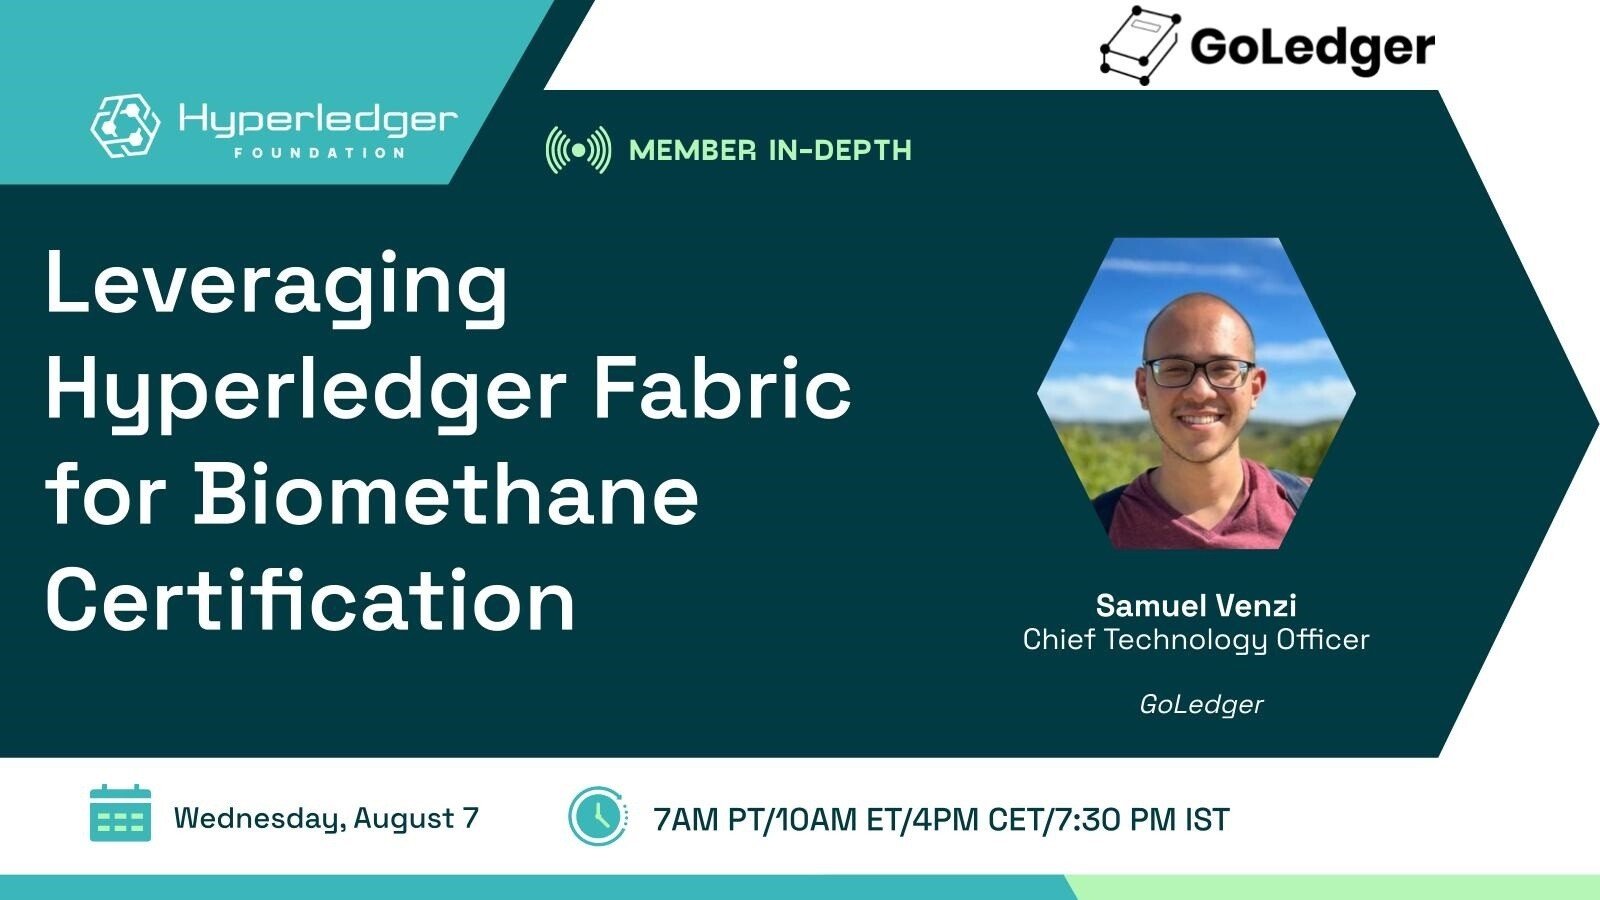 Leveraging Hyperledger Fabric for Biomethane Certification featured image